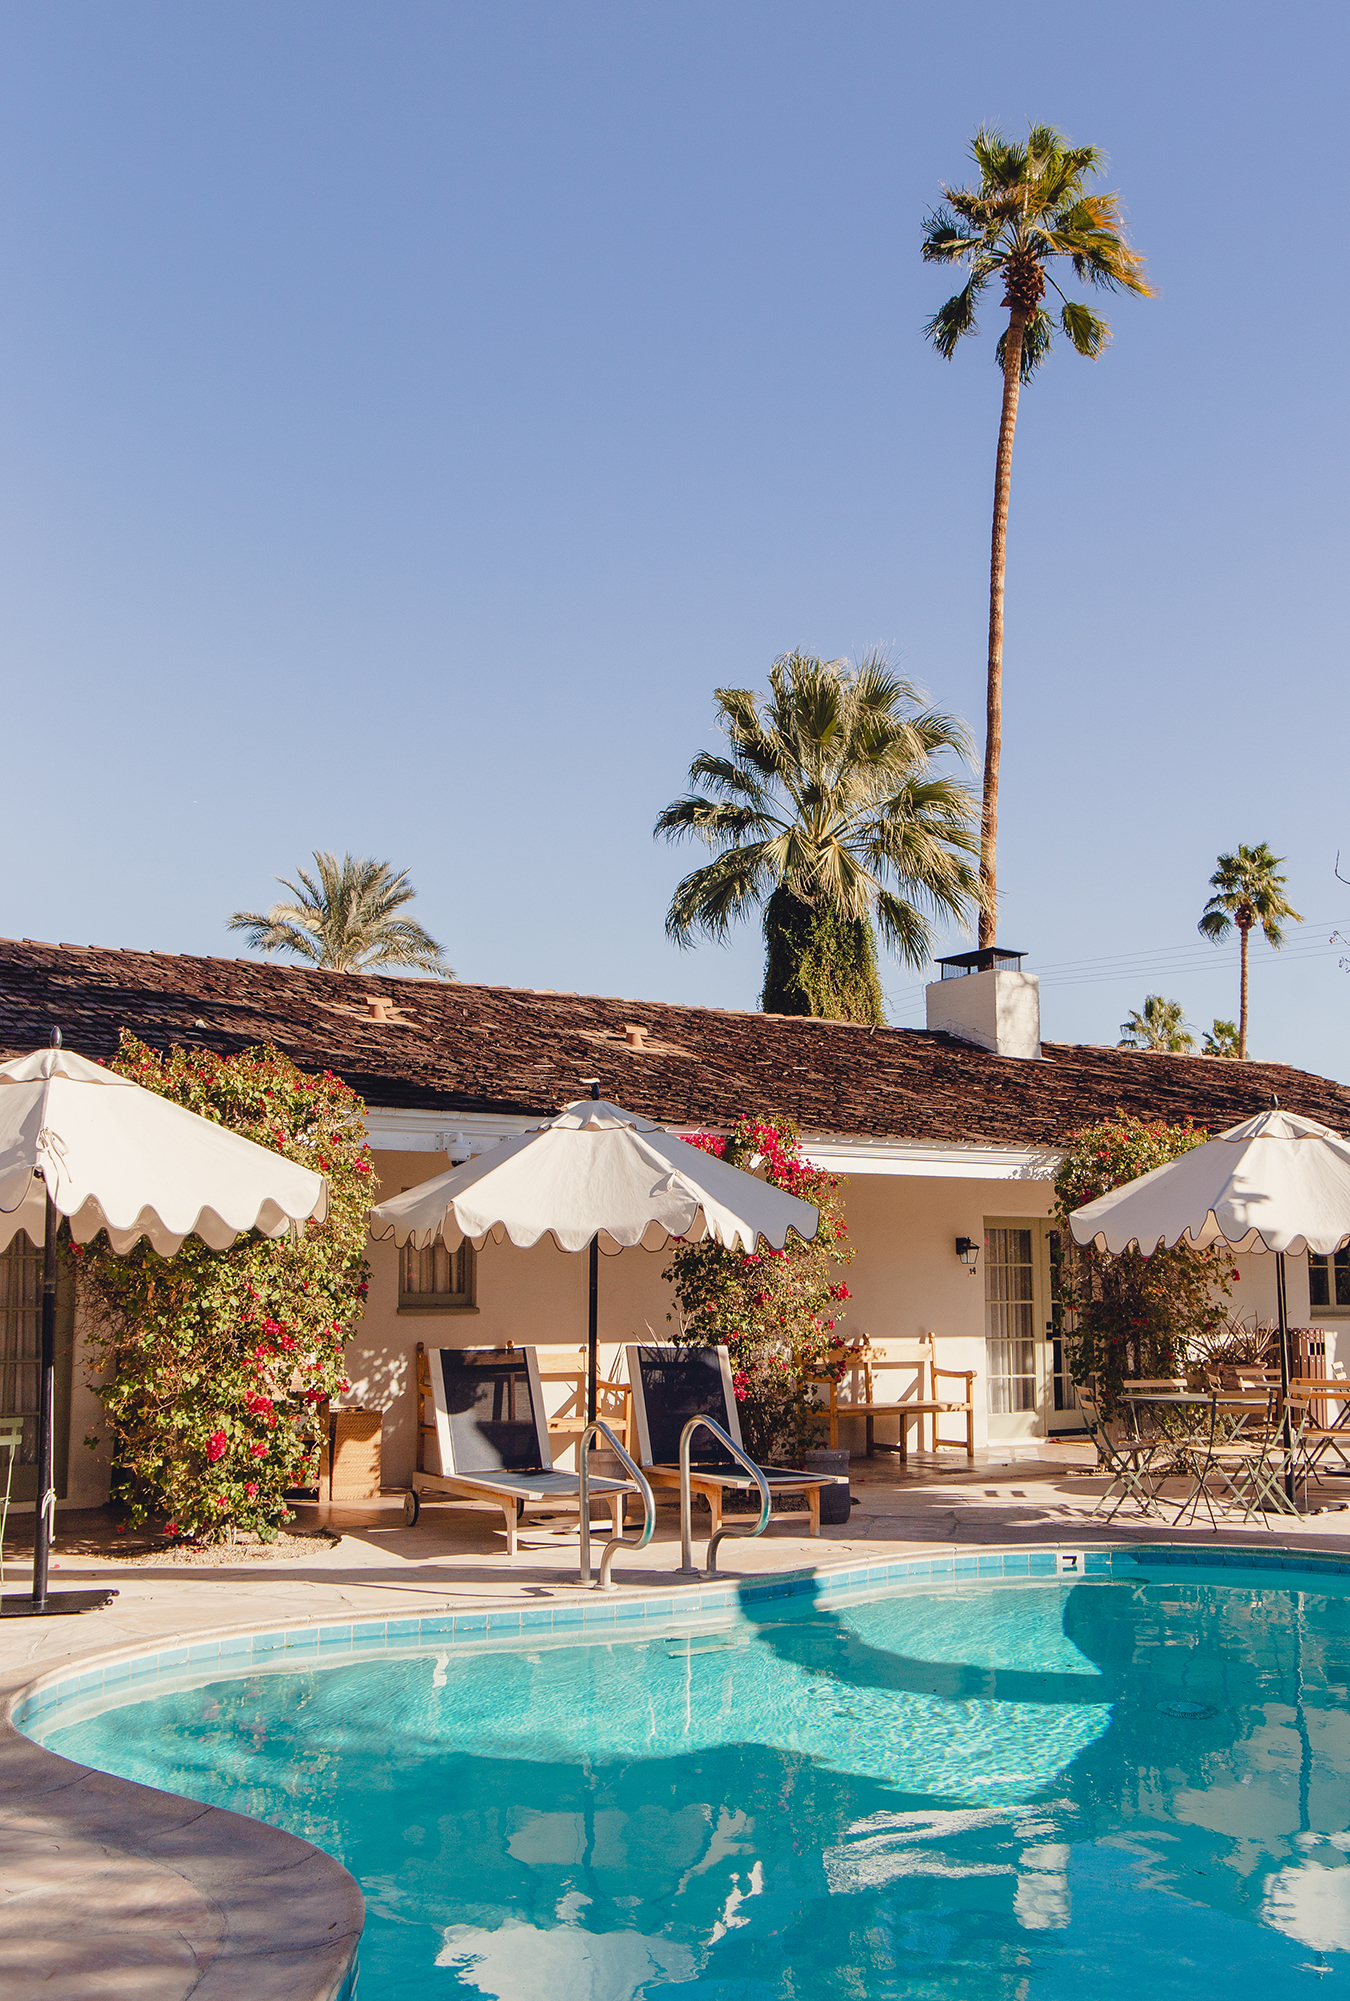 Poolside view of loungers and umbrellas with palm trees in the background at boutique hotel Casa Cody in Palm Springs, California.